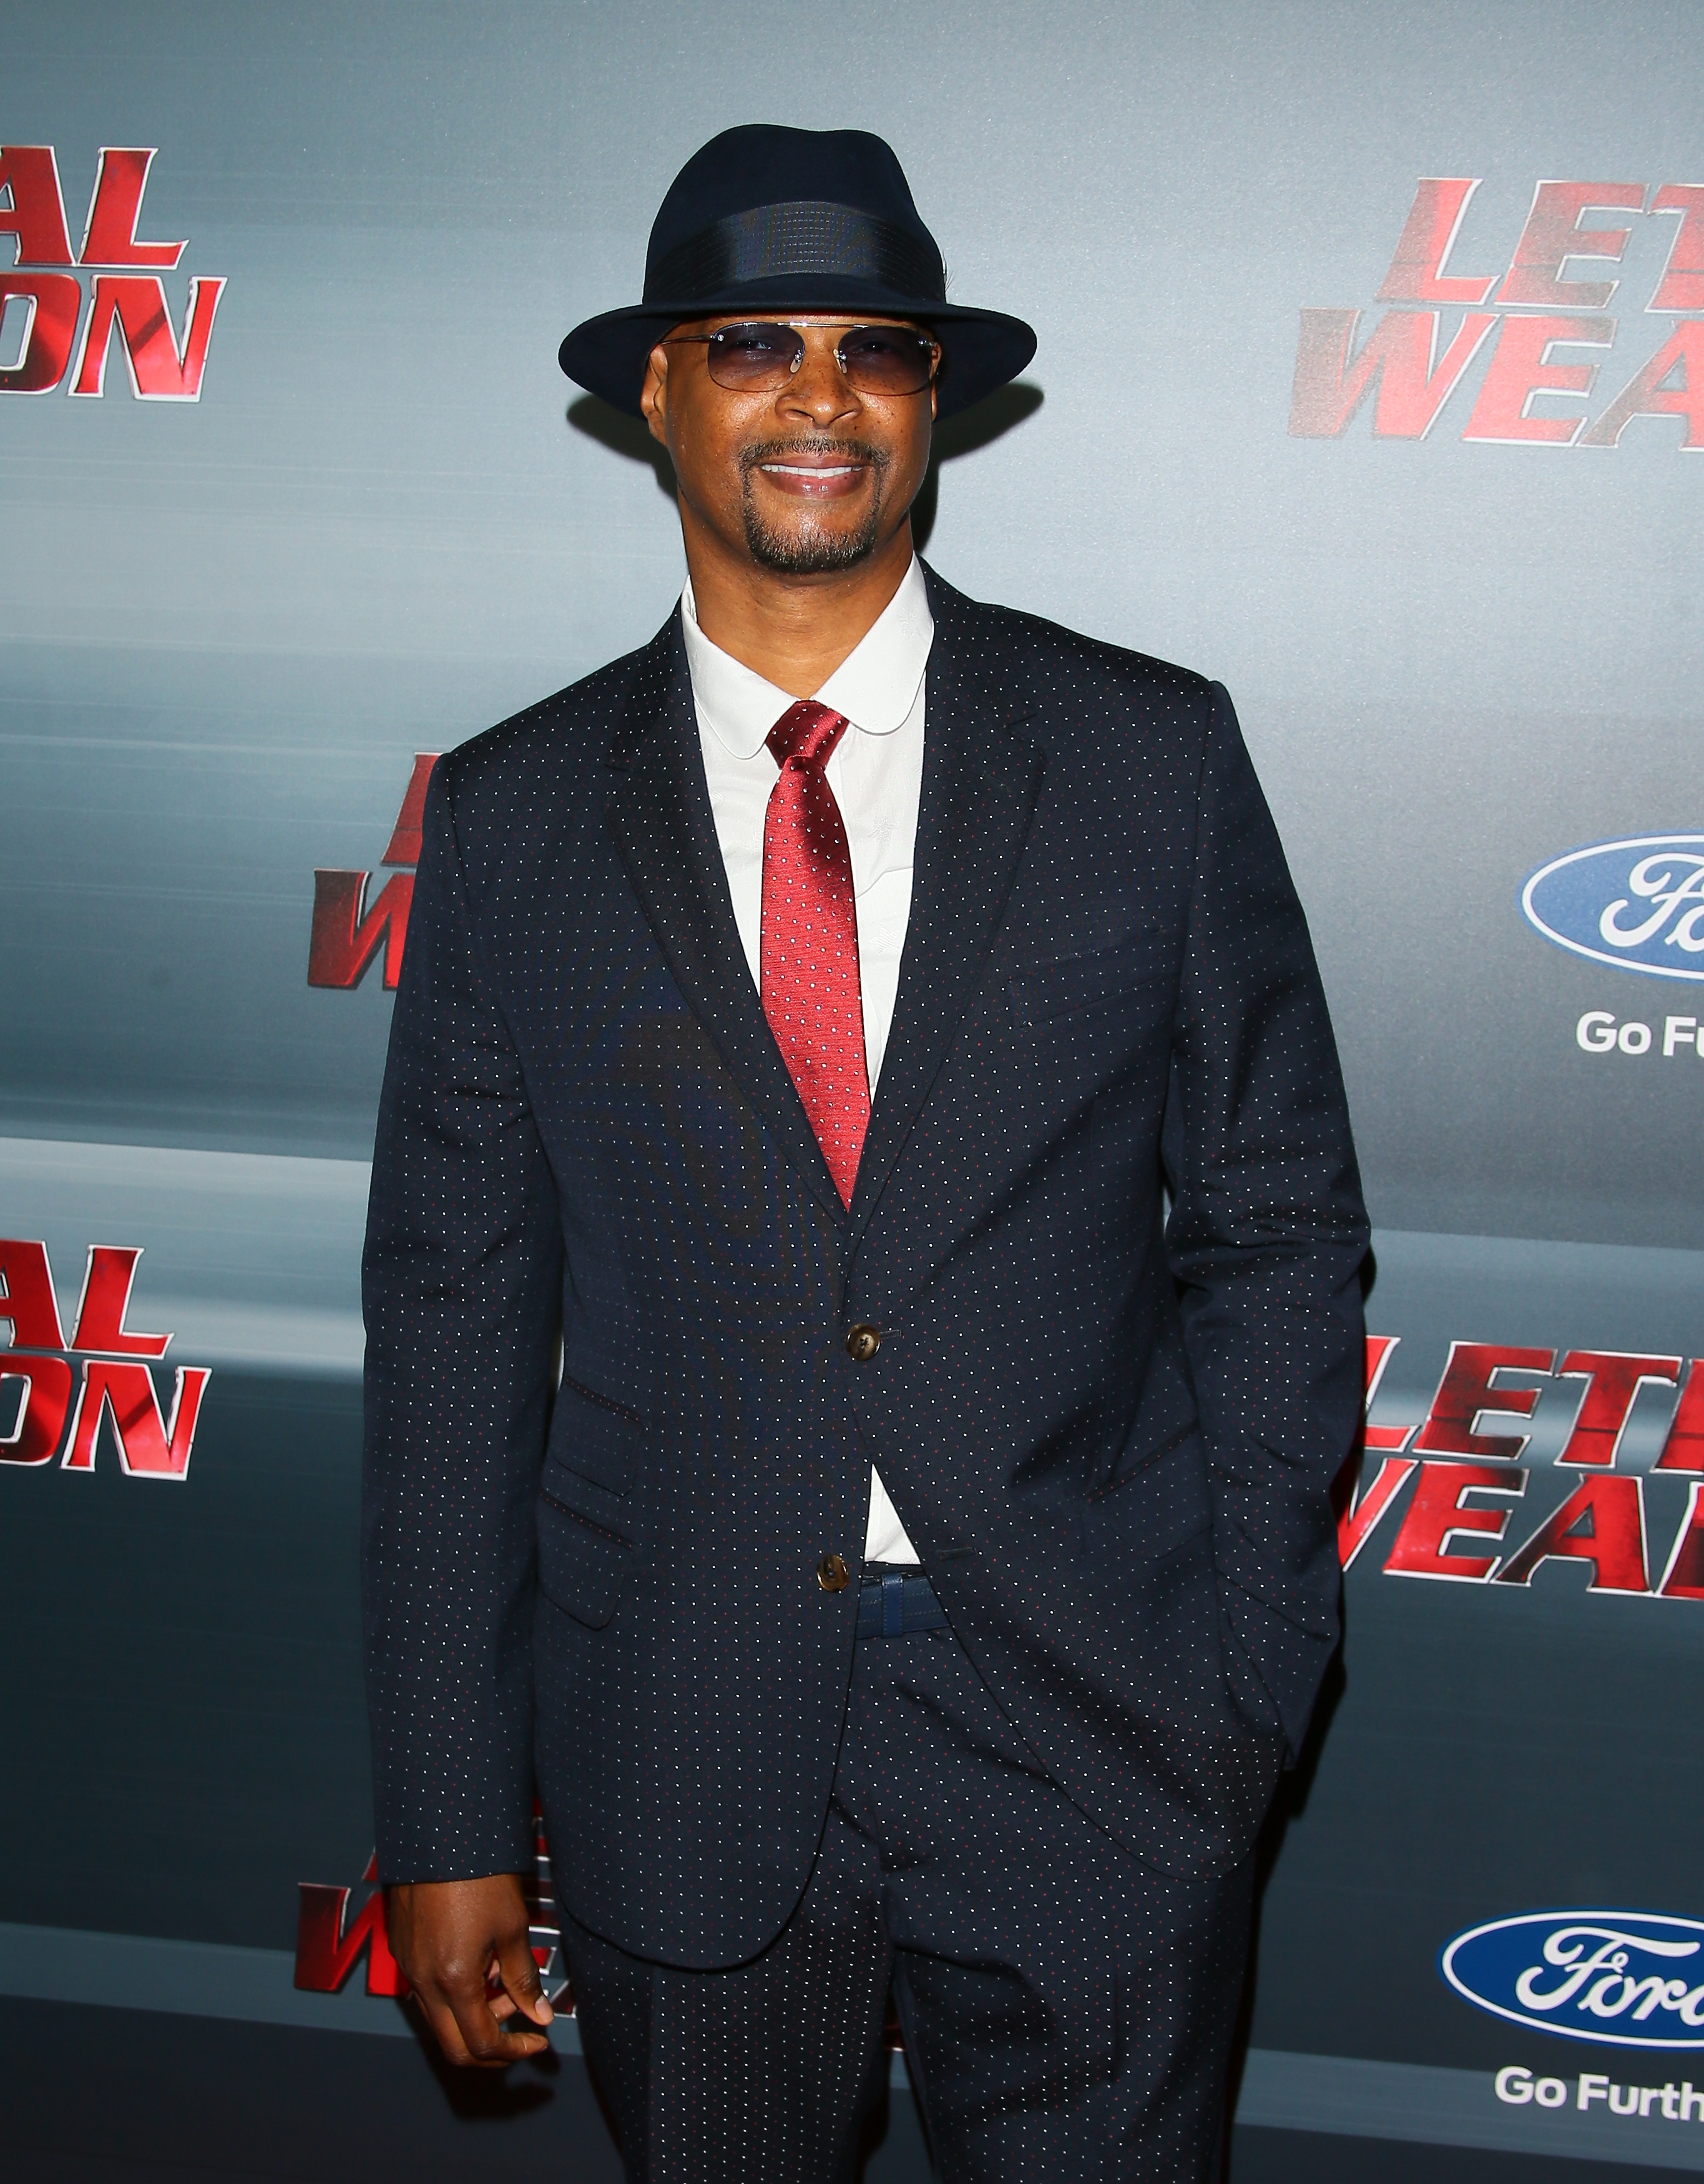 Damon Wayans Sr. at the premiere of Fox Network's "Lethal Weapon" on September 12, 2016, in Los Angeles, California. | Source: Getty Images